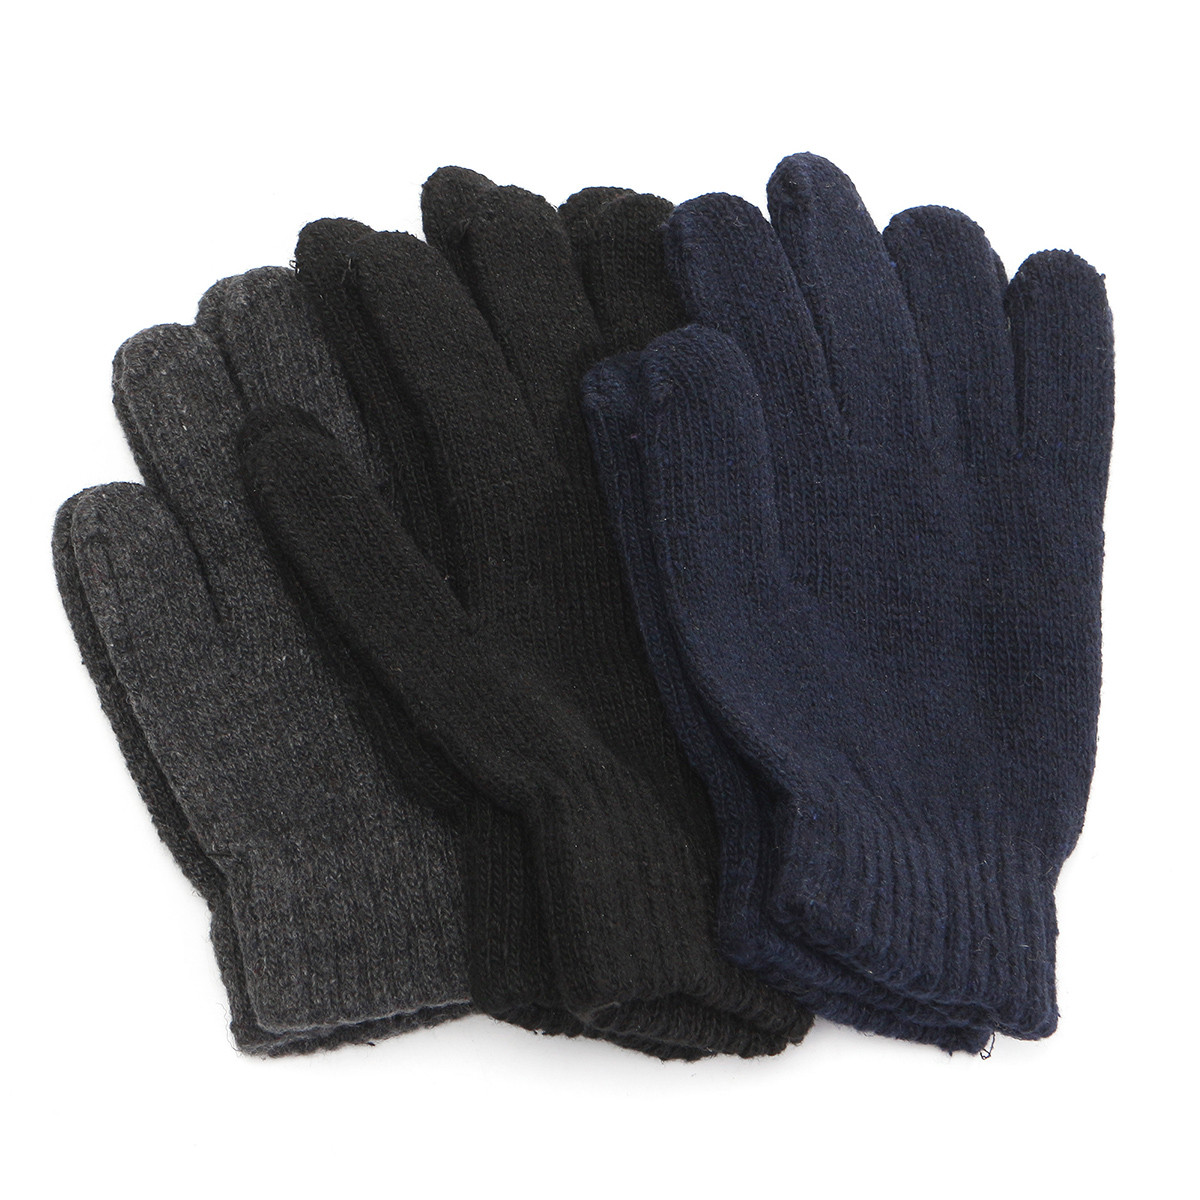 Unisex-Woolly-Knitted-Full-Finger-Gloves-Winter-Warmer-Thermal-Mittens-1108953